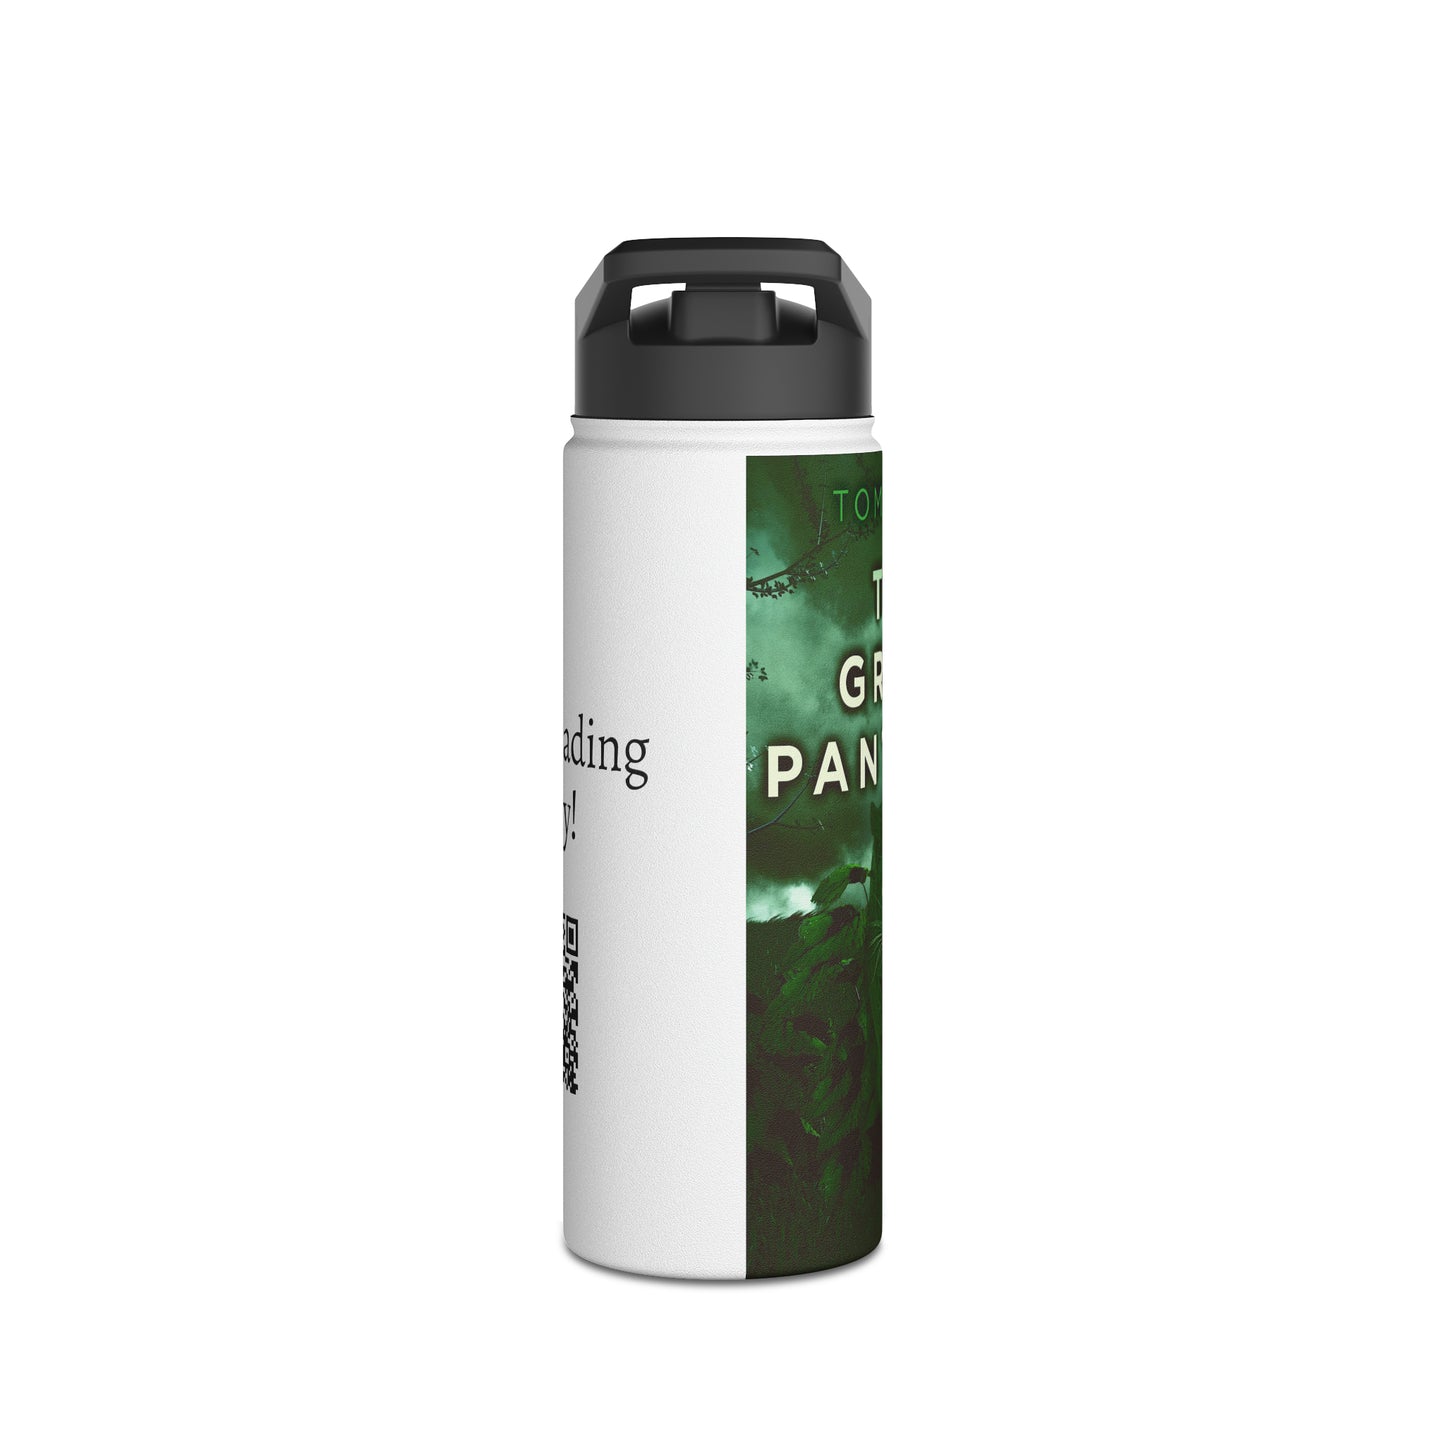 The Green Panthers - Stainless Steel Water Bottle